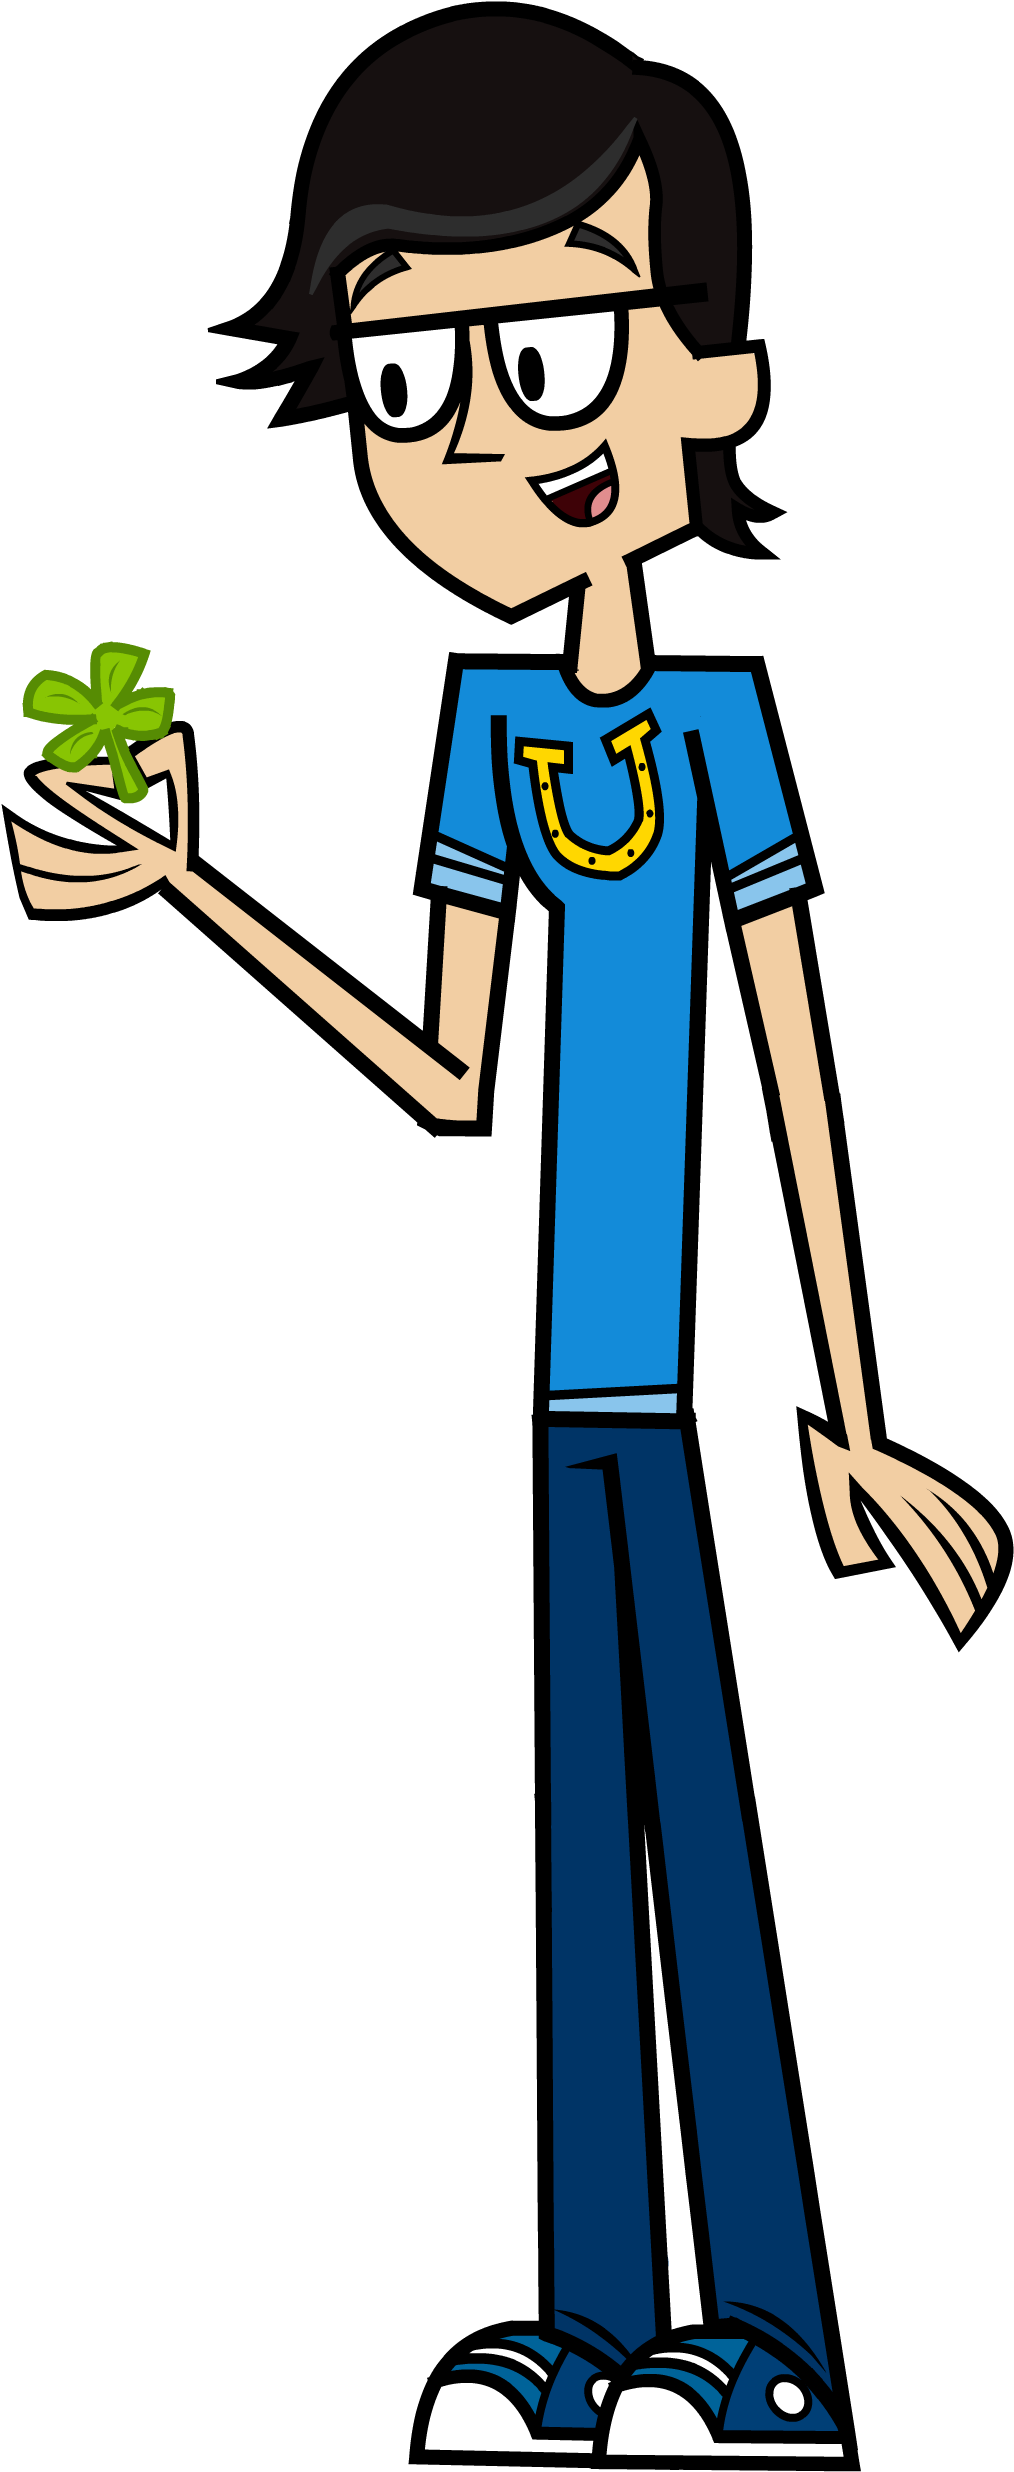 Tim Holding A 4-leaf Clover, A Sign For Luck - Total Drama Gone Wild Tim (1067x2501)